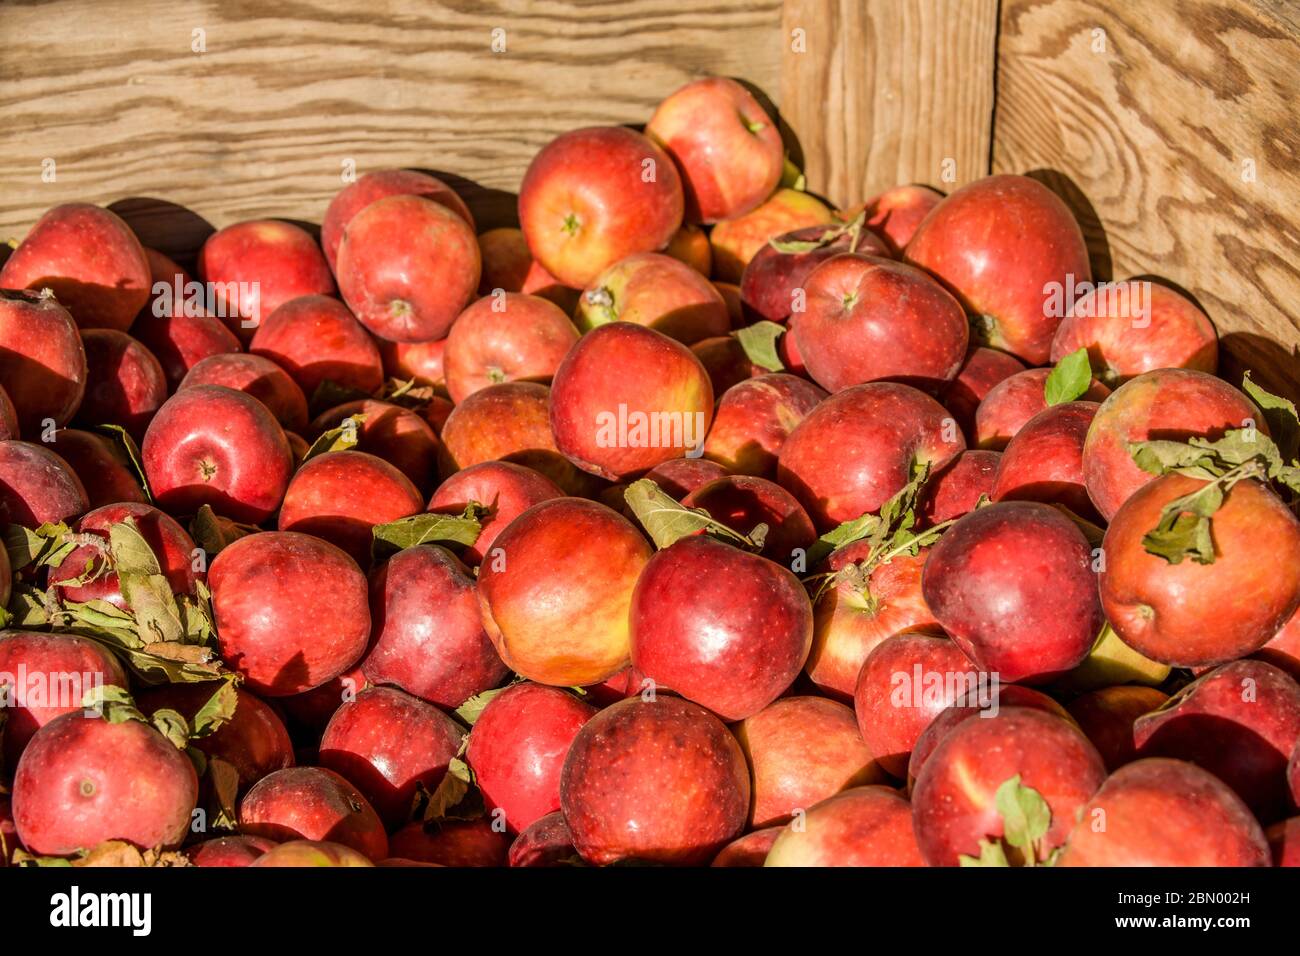 A bin of Winesap apples for sale.  Often known as Virginia Winesap, a tart small apple, and like many US heirloom varieties, keeps well in storage. Stock Photo